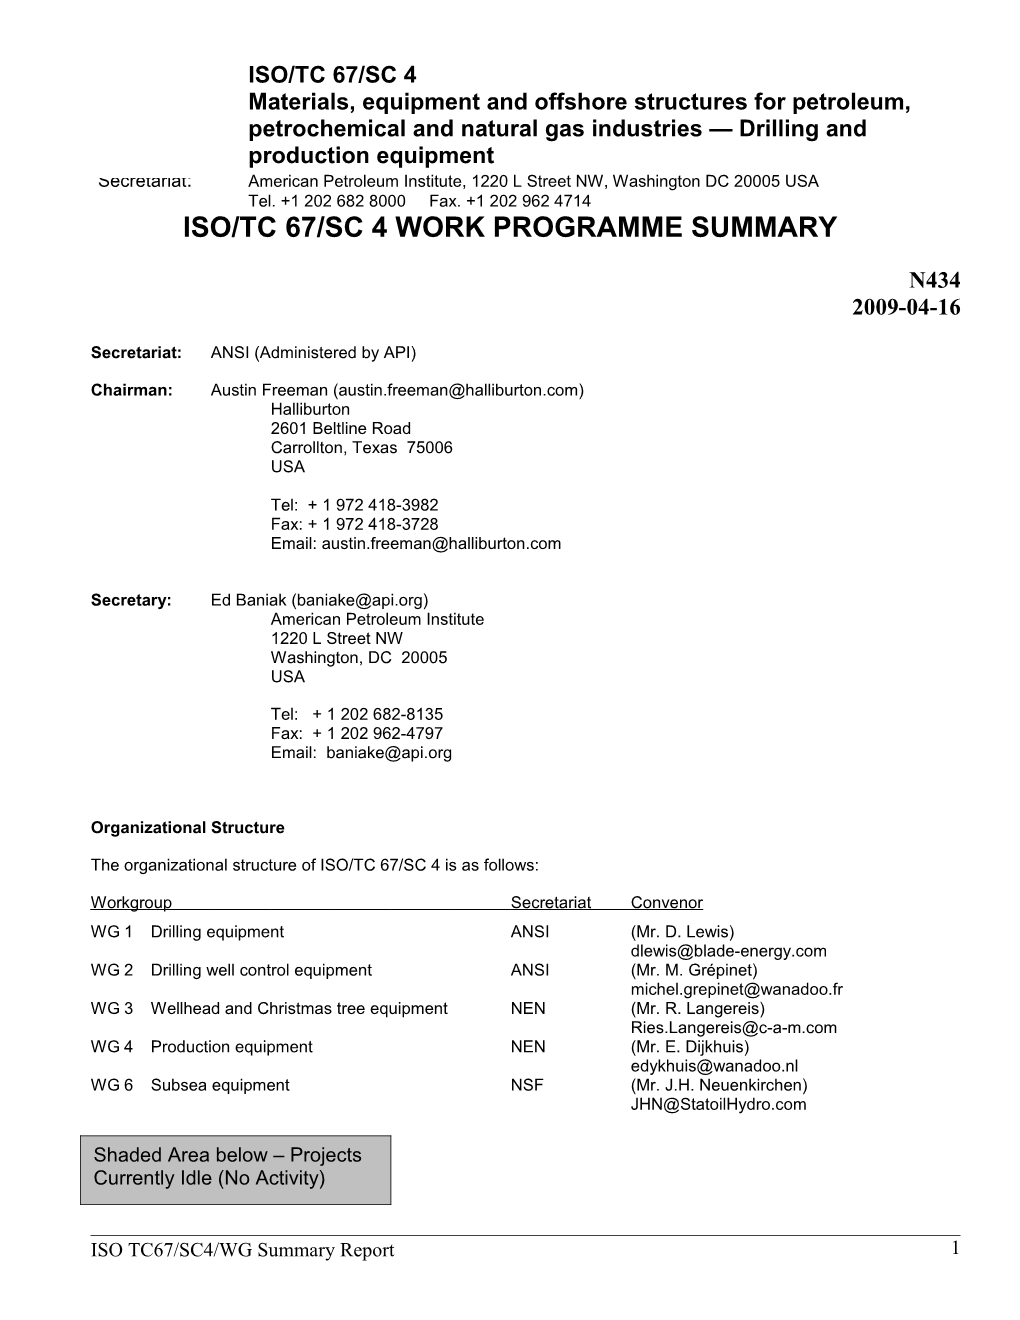 ISO/TC 67/SC 4 Work Programme - Continuously Maintained 2009-04-16